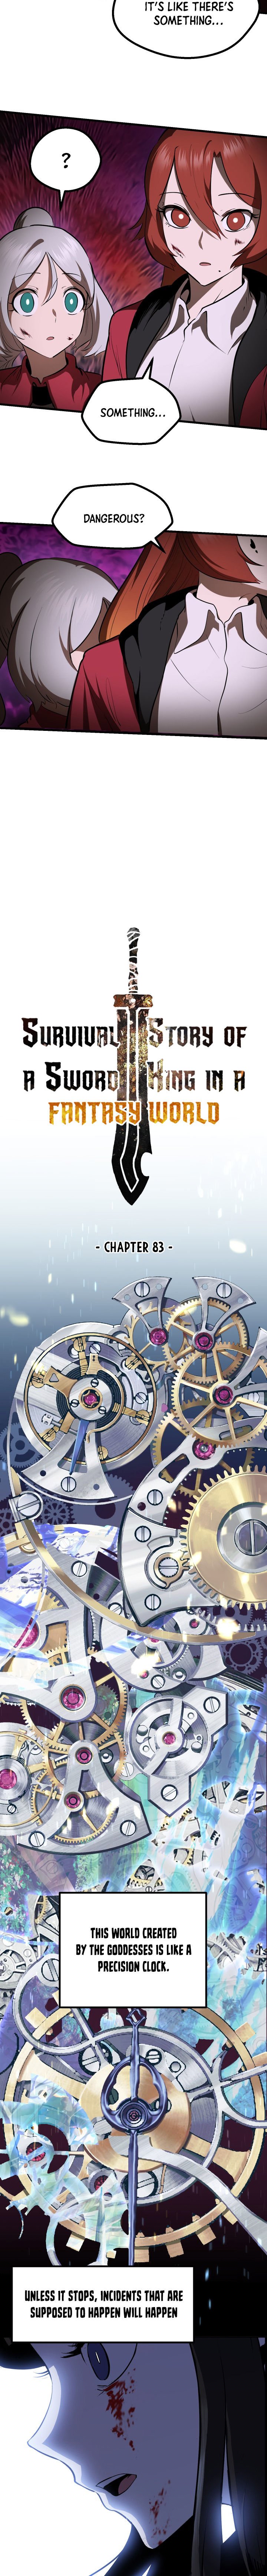 survival-story-of-a-sword-king-in-a-fantasy-world-chap-83-9